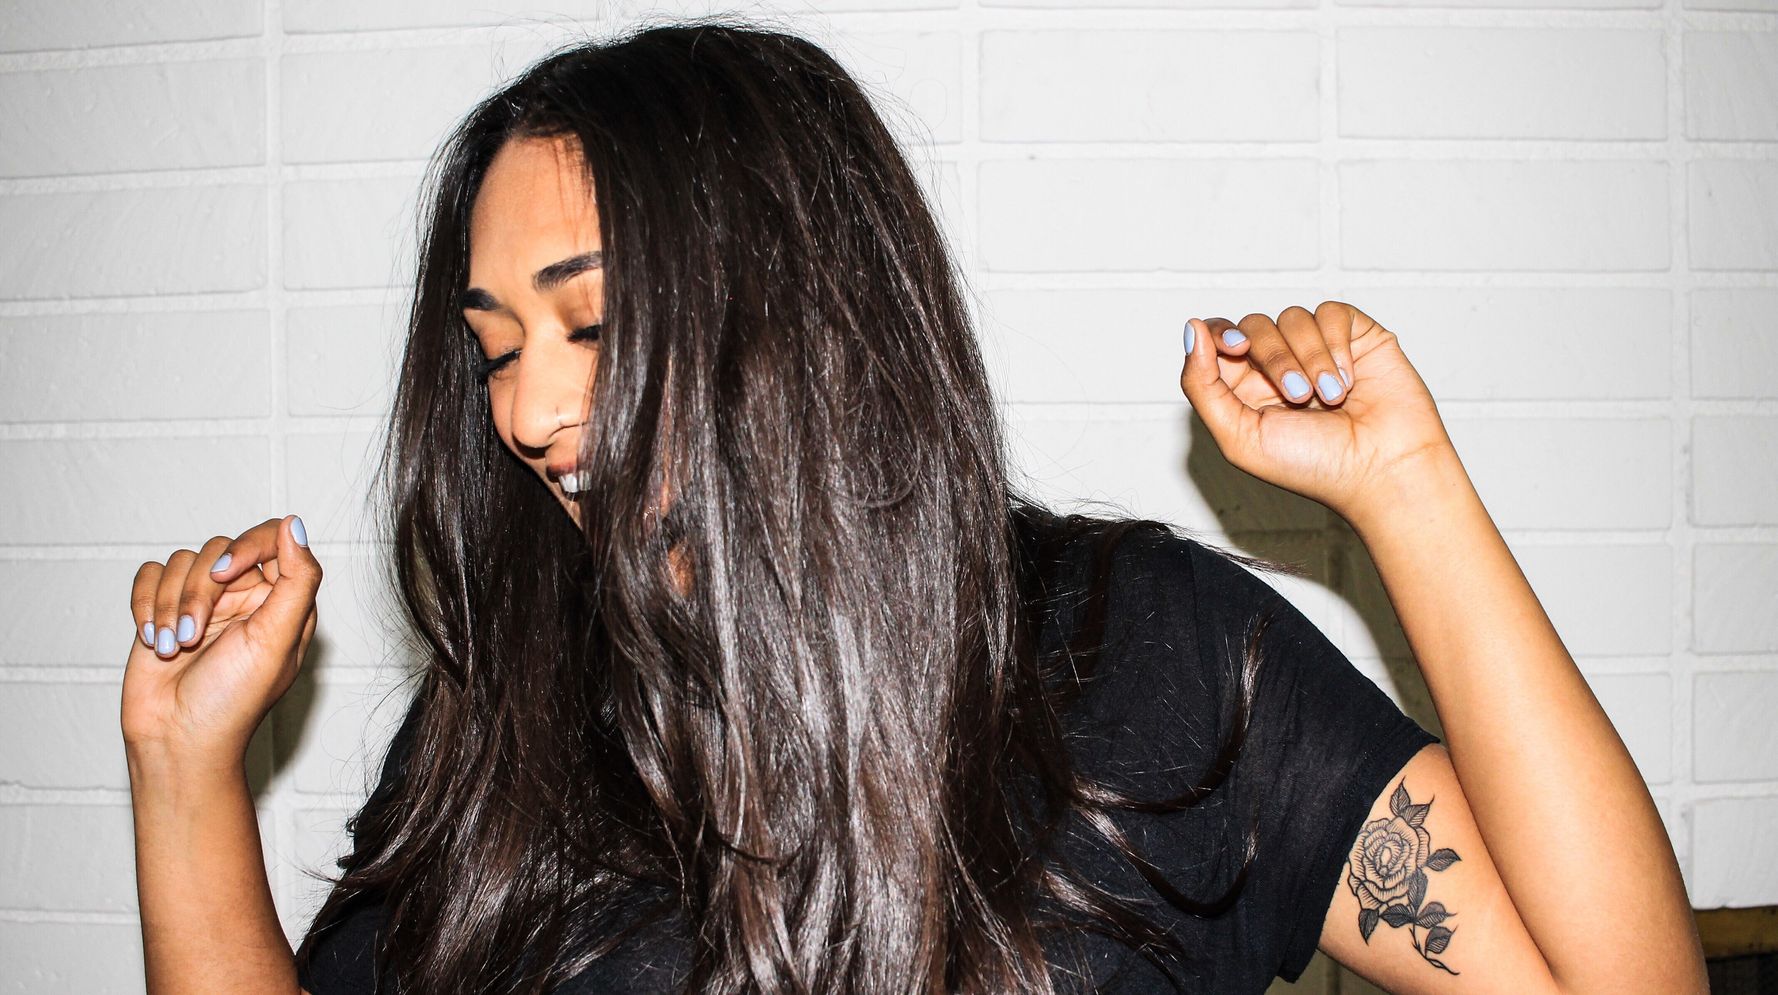 How To Make Your Hair Grow Faster: What Works And What Doesn't